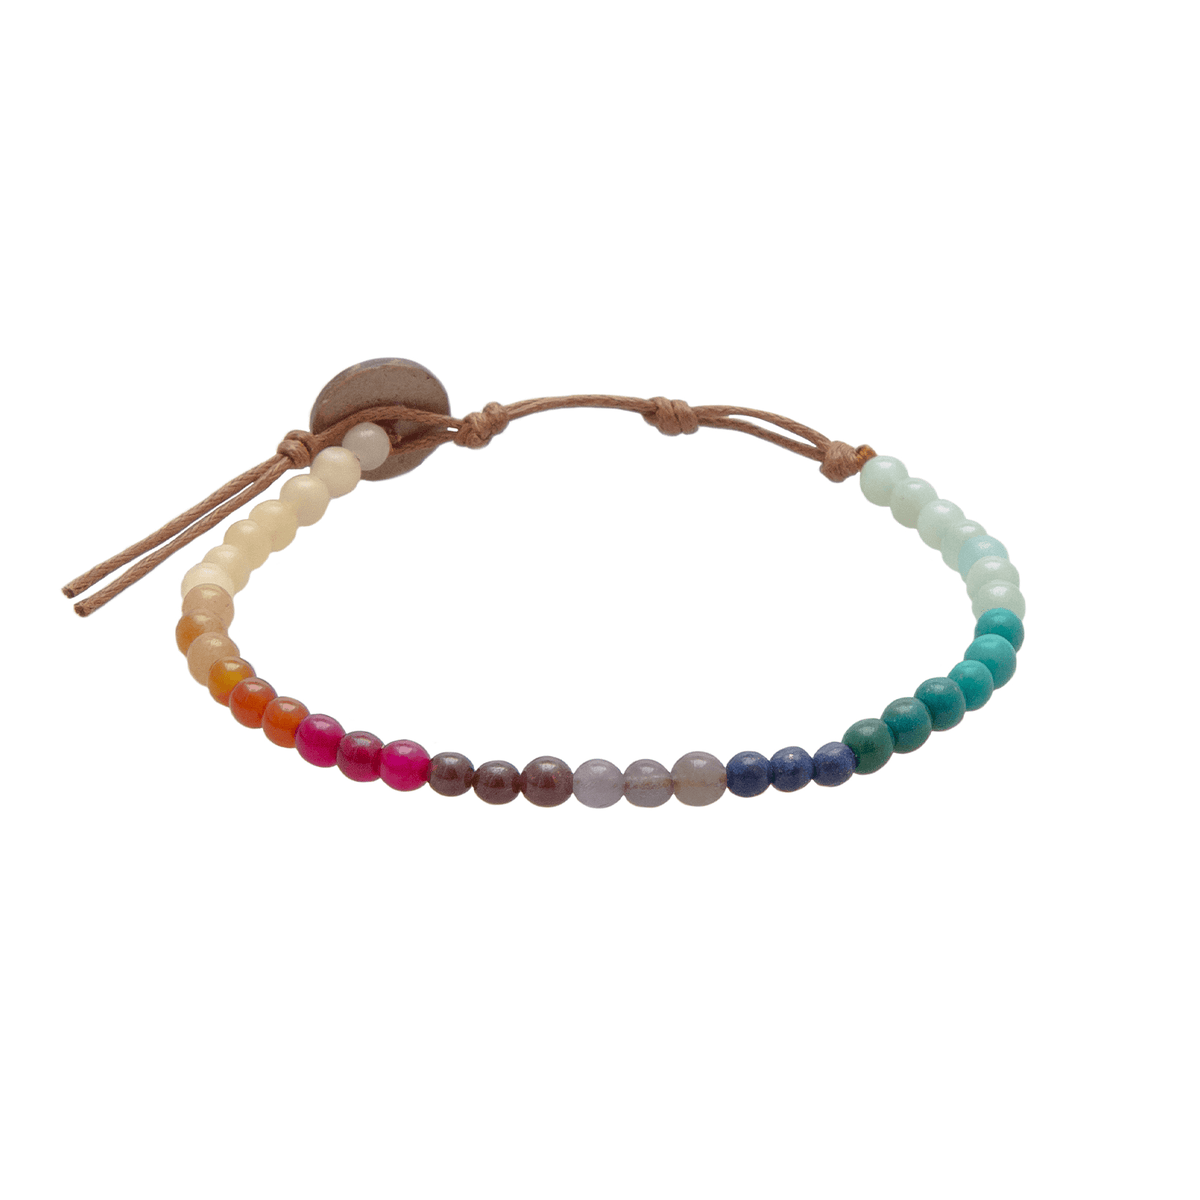 4mm multicolor stone healing bracelet with coconut button clasp